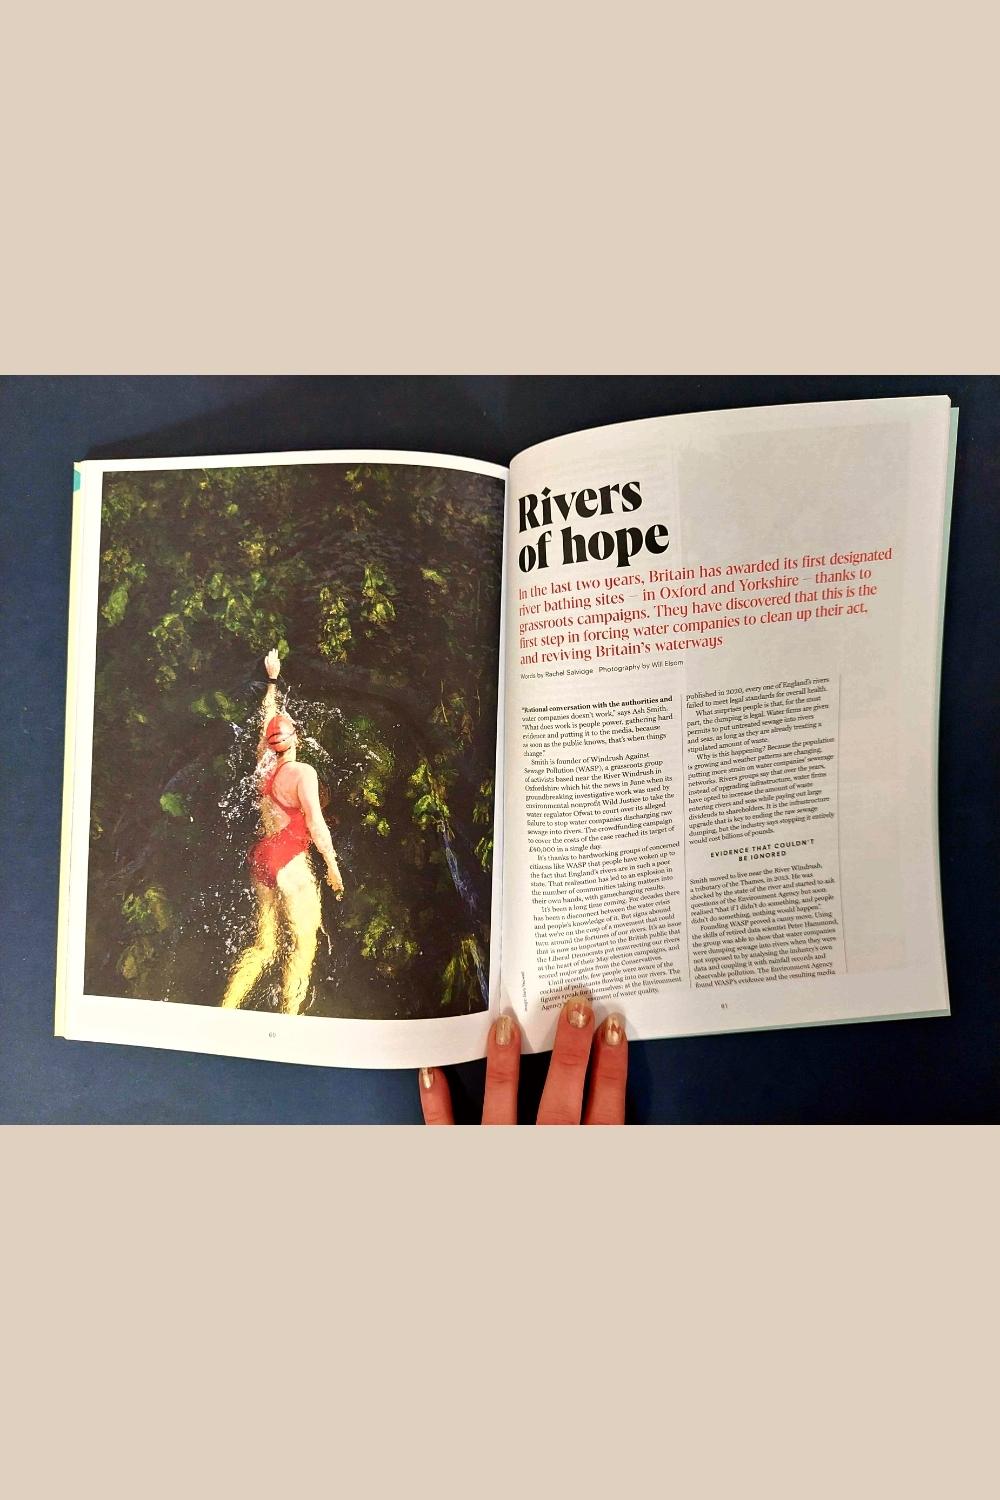 Rivers of hope in issue 110 of Positive News